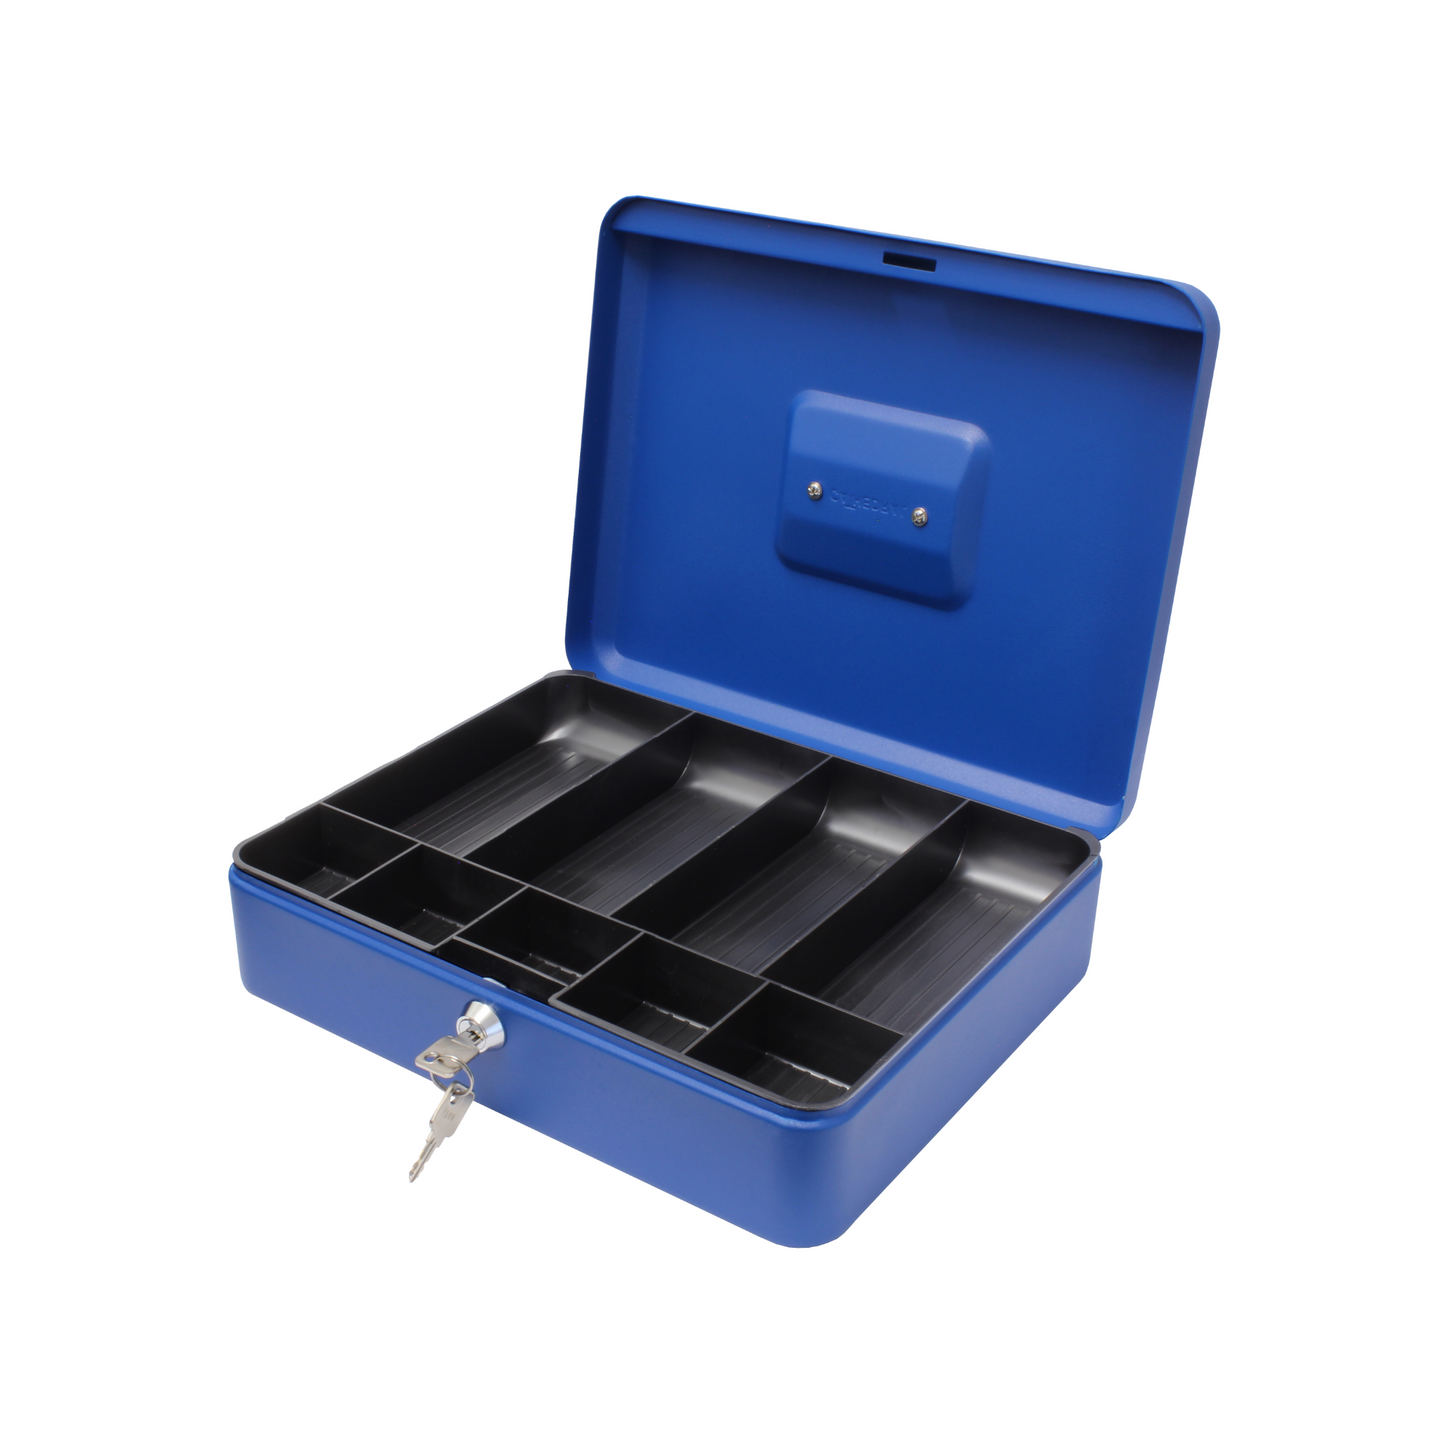 An open, matte blue, 12-inch key lockable cash box with a removable 9-compartment coin tray, displaying an assortment of coins and banknotes. A set of 2 keys on a ring is shown inserted into the lock on the front of the cash box.